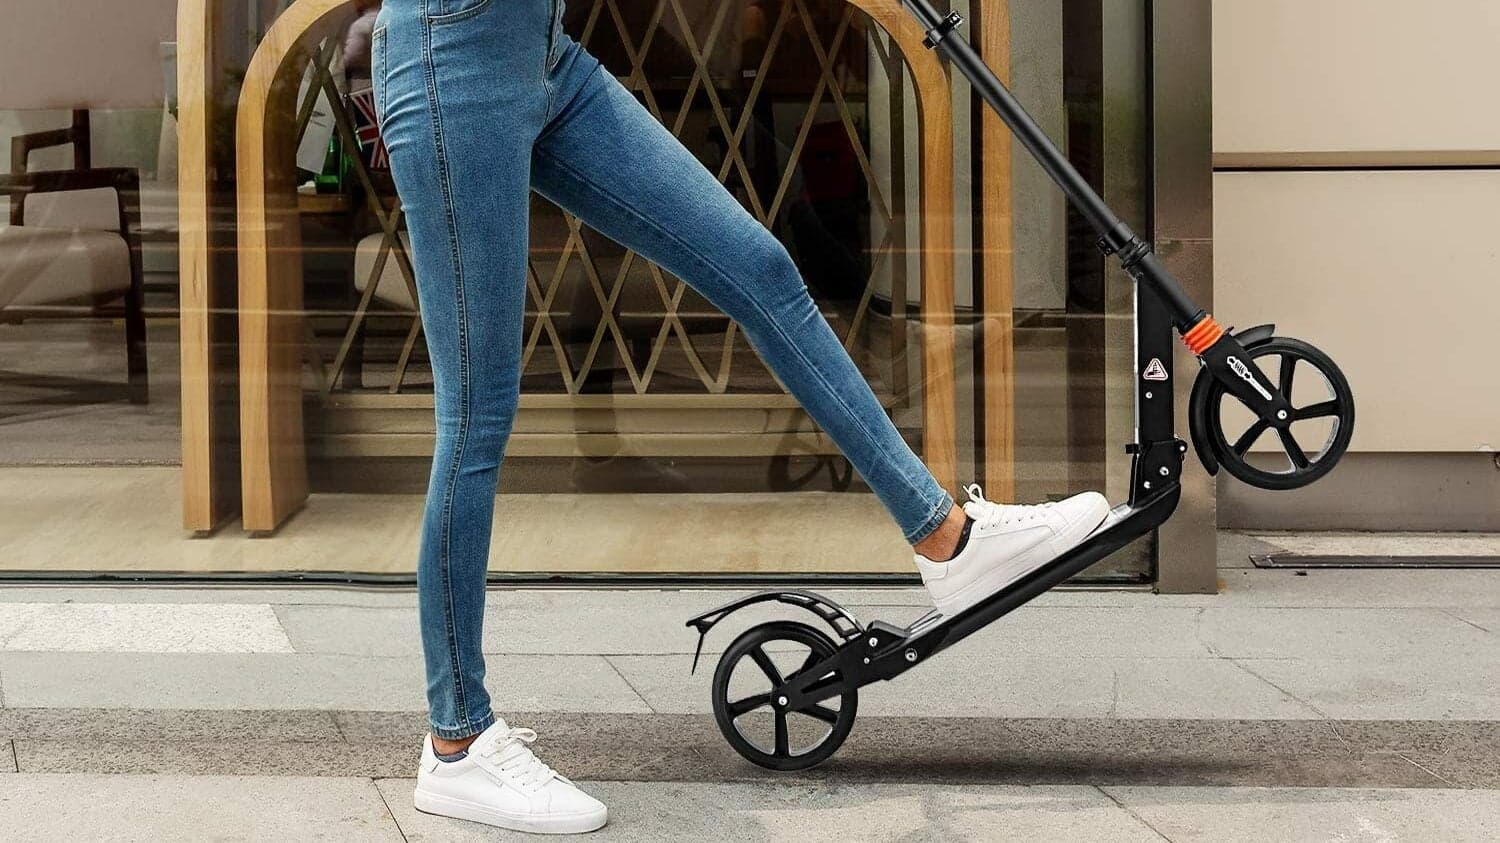 The Best Scooters for Adults (Review & Buying Guide) in 2022